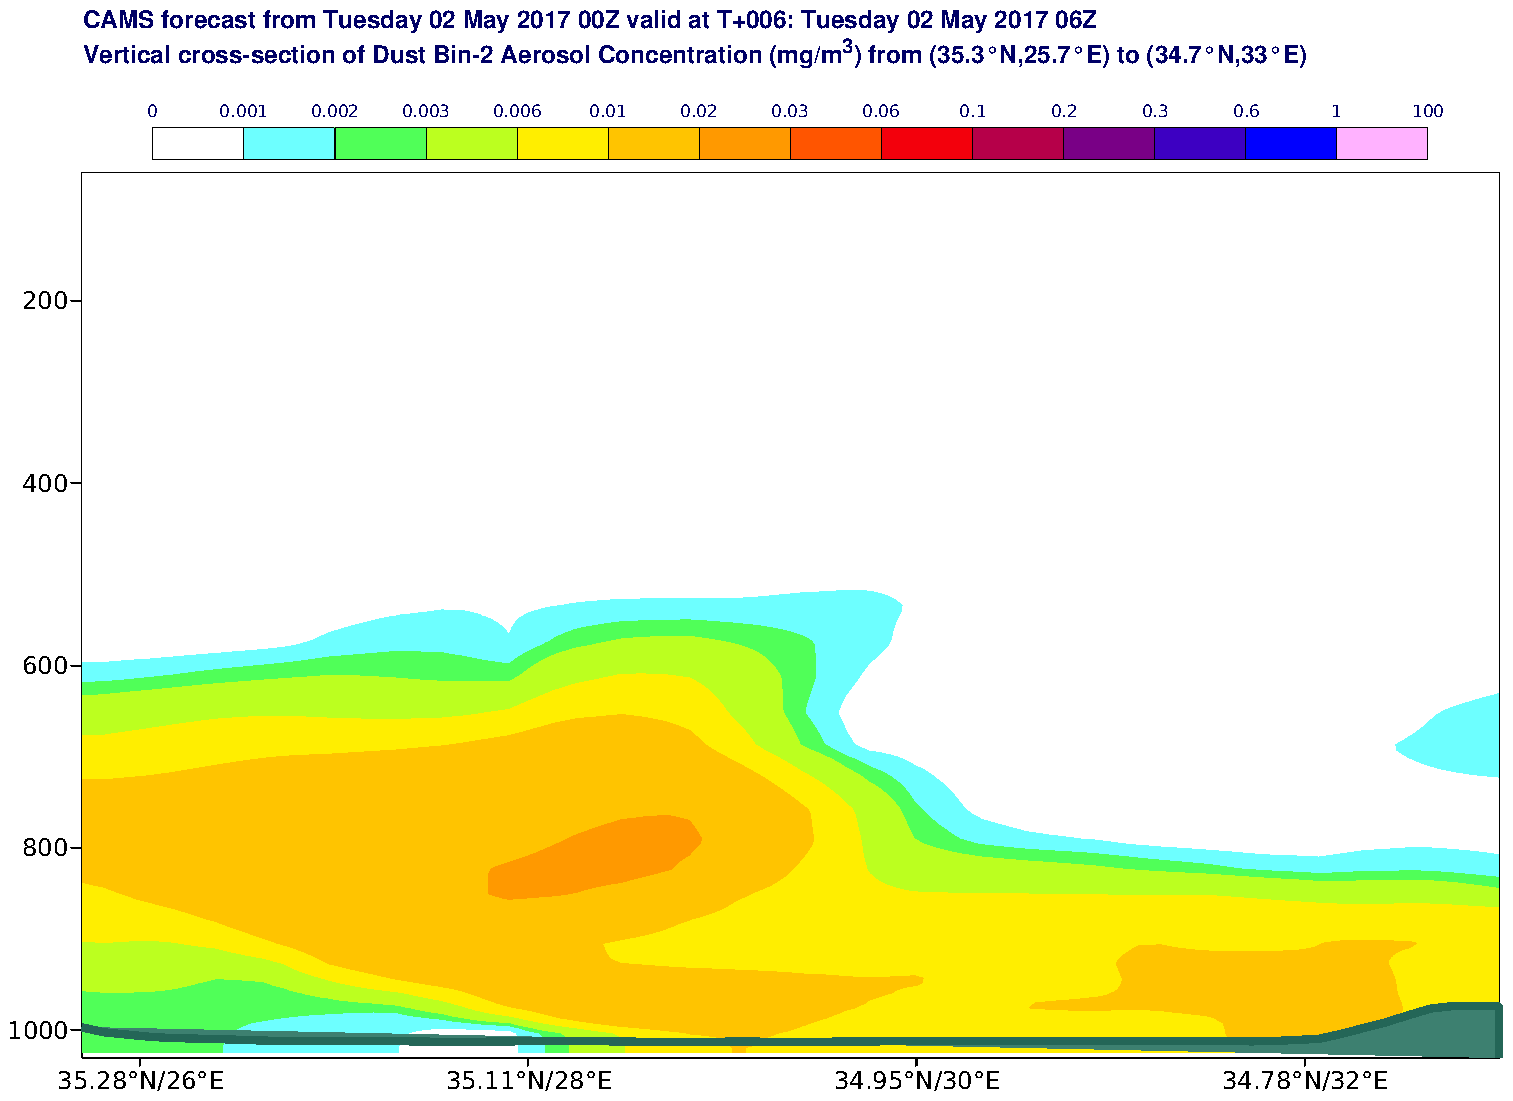 Vertical cross-section of Dust Bin-2 Aerosol Concentration (mg/m3) valid at T6 - 2017-05-02 06:00